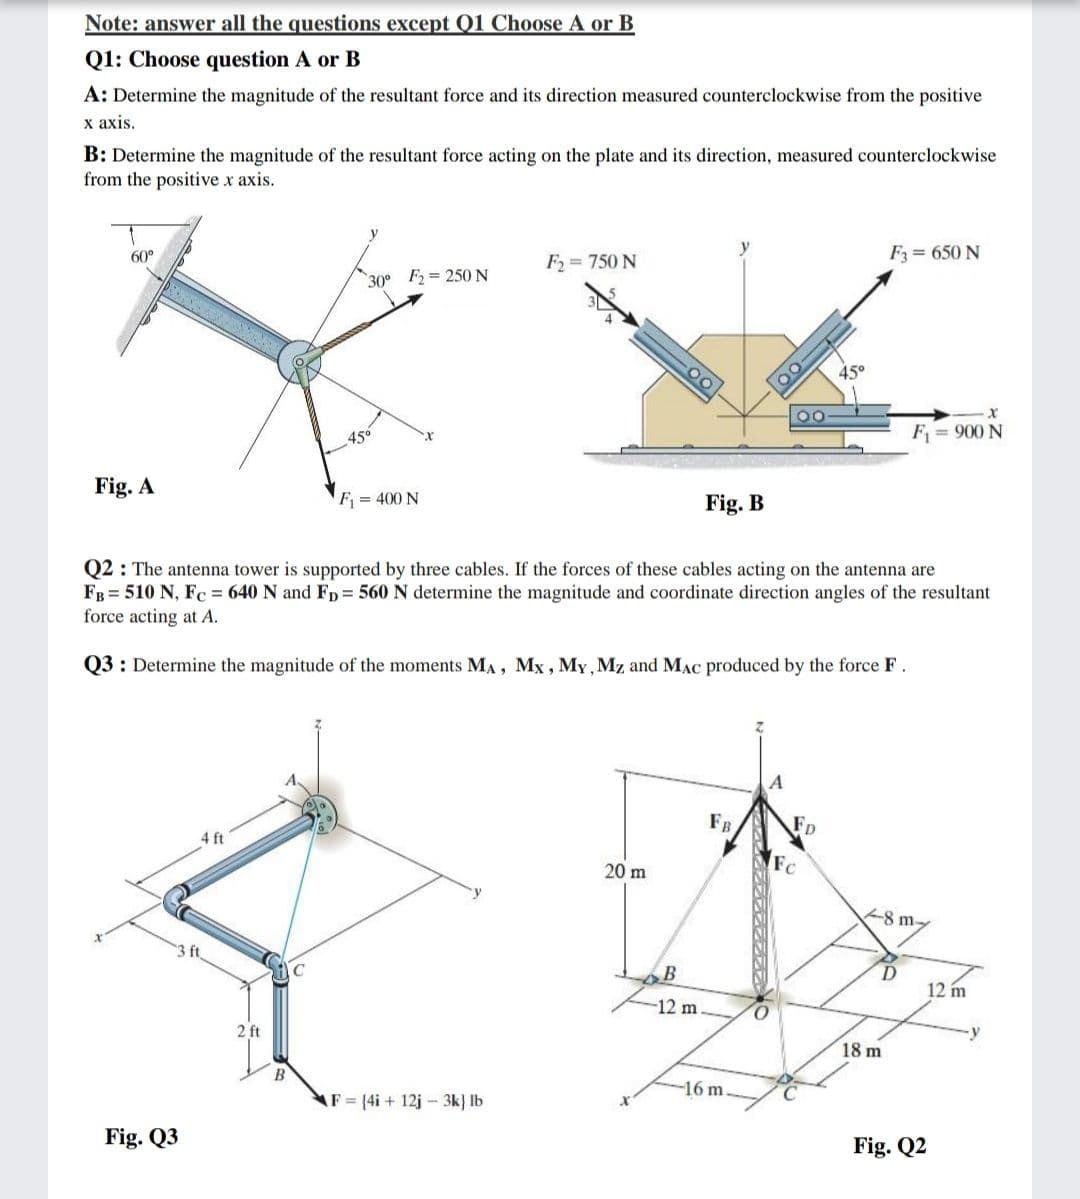 Note: answer all the questions except Q1 Choose A or B
Q1: Choose question A or B
A: Determine the magnitude of the resultant force and its direction measured counterclockwise from the positive
х ахis.
B: Determine the magnitude of the resultant force acting on the plate and its direction, measured counterclockwise
from the positive x axis.
y
60°
F2 = 750 N
F = 650 N
30° F2 = 250 N
45°
45°
F = 900 N
Fig. A
F = 400 N
Fig. B
Q2 : The antenna tower is supported by three cables. If the forces of these cables acting on the antenna are
FB = 510 N, Fc = 640 N and FD = 560 N determine the magnitude and coordinate direction angles of the resultant
force acting at A.
Q3: Determine the magnitude of the moments MA, Mx , My, Mz and MAC produced by the force F.
A
FB
Fp
4 ft
Fc
20 m
8 m-
3 ft
12 m
-12 m
O.
2 ft
18 m
16 m.
AF (4i + 12j- 3k} lb
Fig. Q3
Fig. Q2
